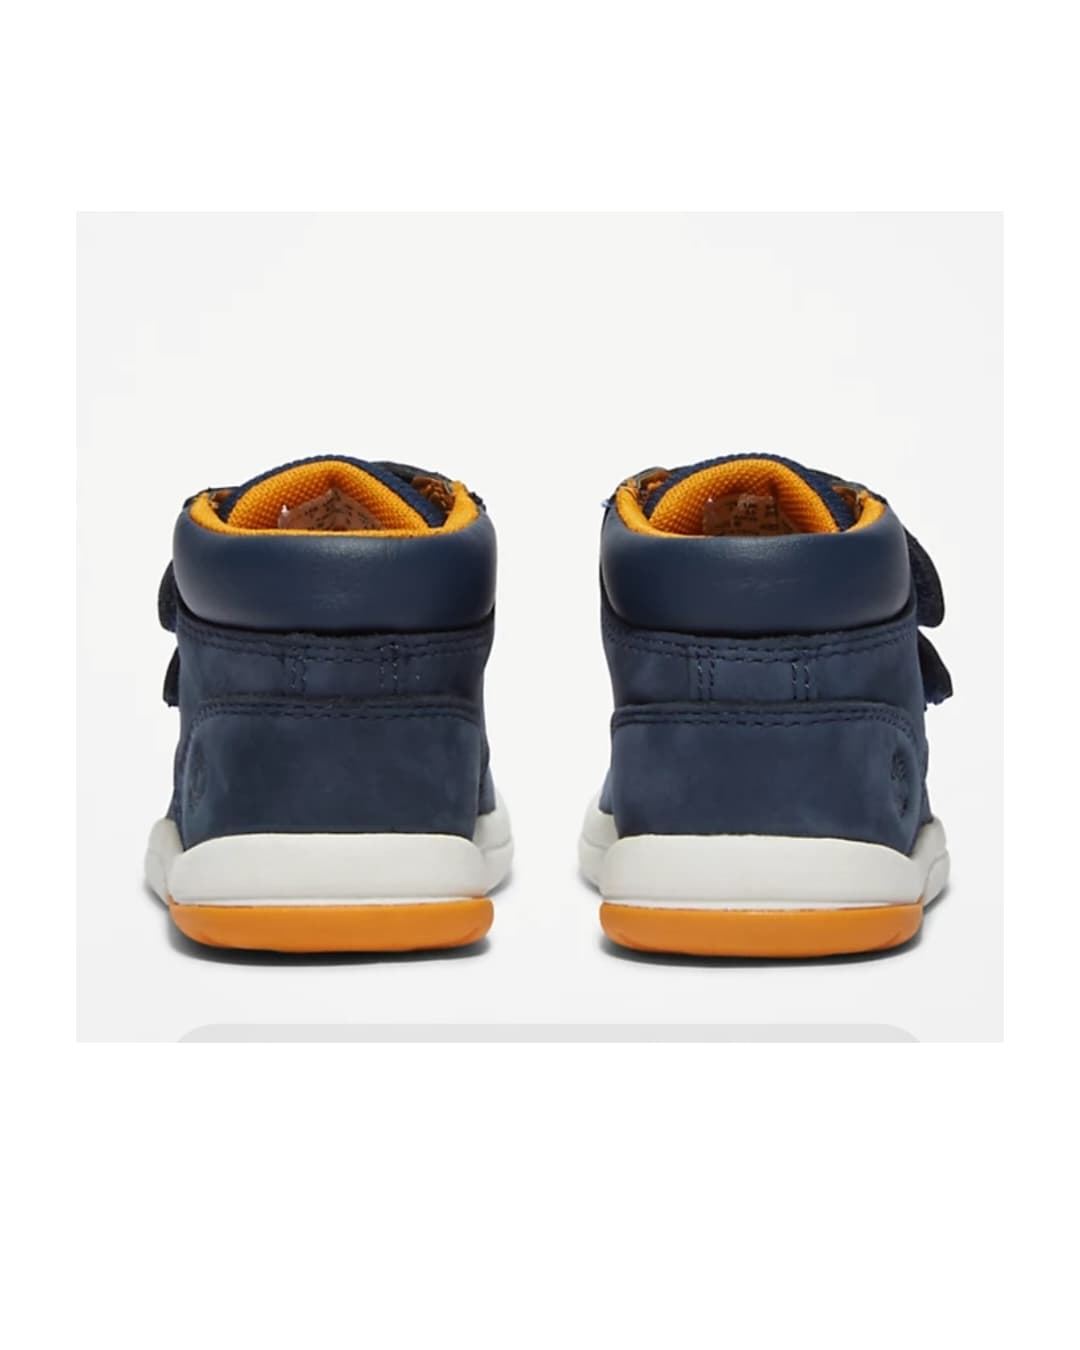 Timberland Boy's Boots Toddle Tracks Navy Blue - Image 3